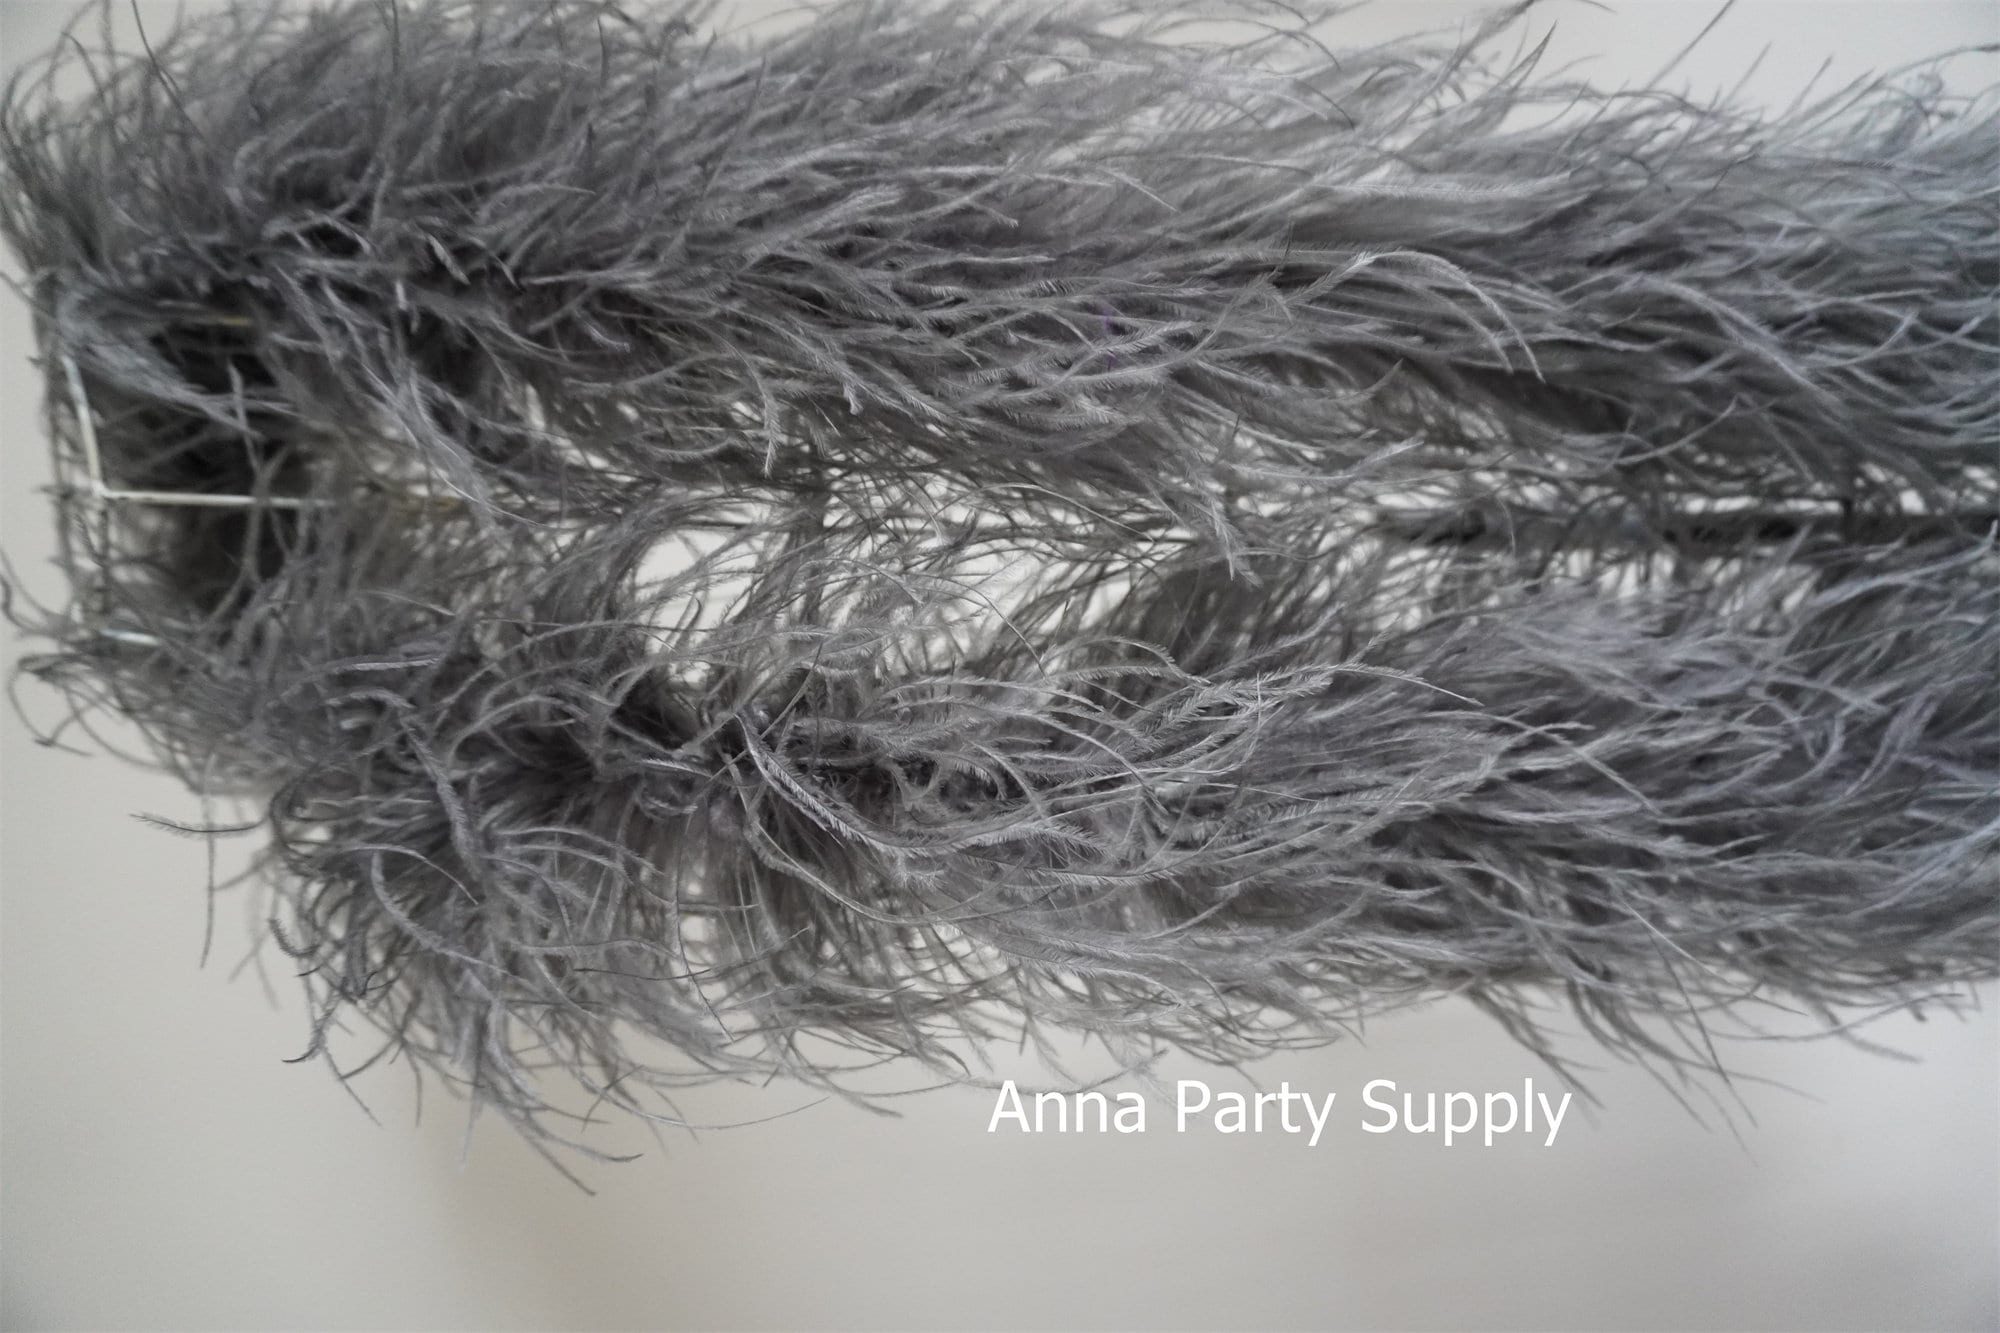 Annapartysupply Black Feather Skirt for Dancing Showgirl Party Supply